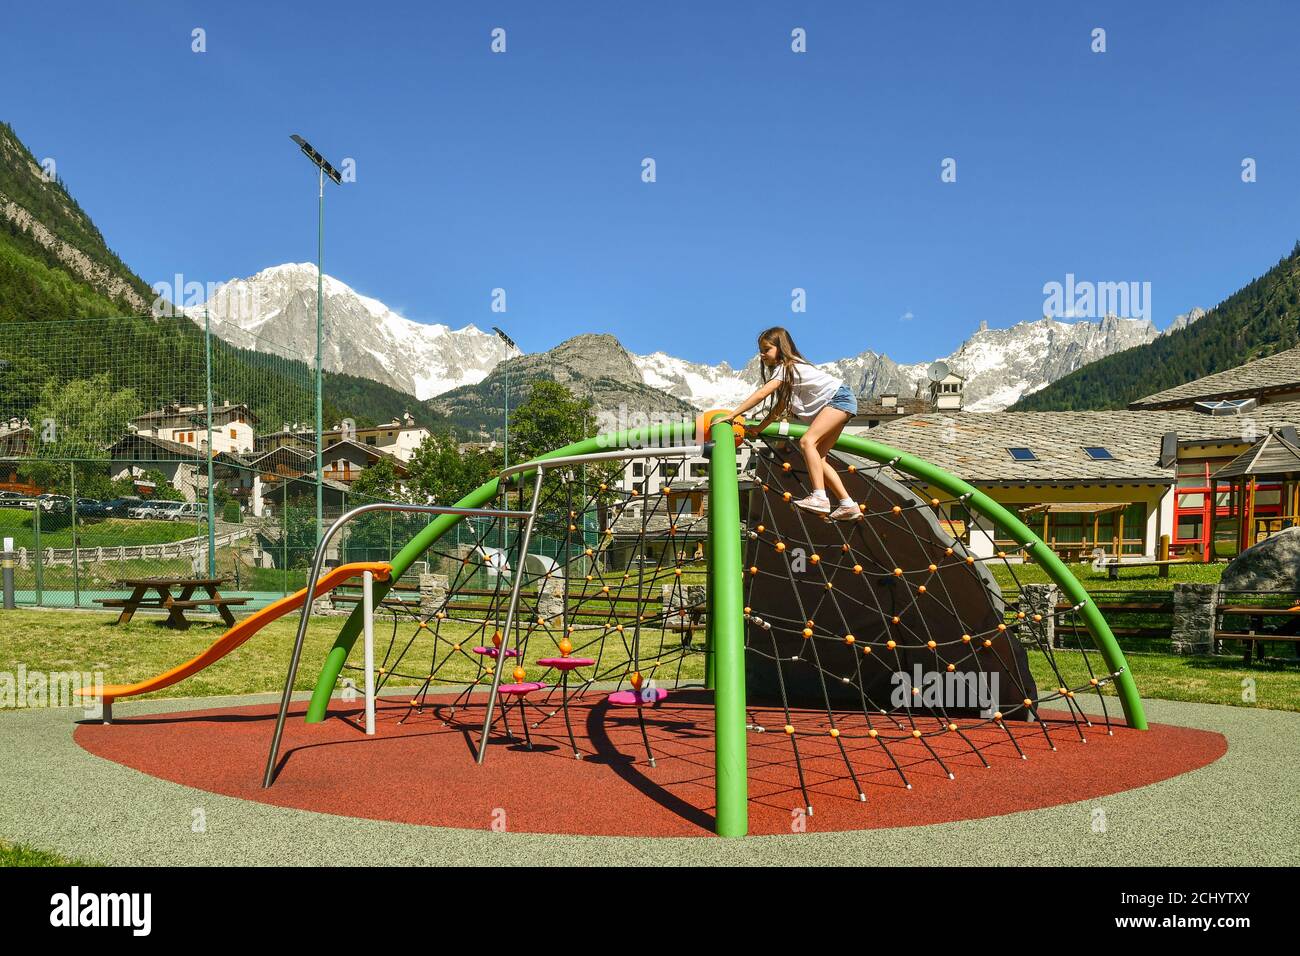 Little girl (10 y.o.) climbing a play structure in a playground of the alpine village at the foot of Mont Blanc massif, Pré-Saint-Didier, Aosta, Italy Stock Photo